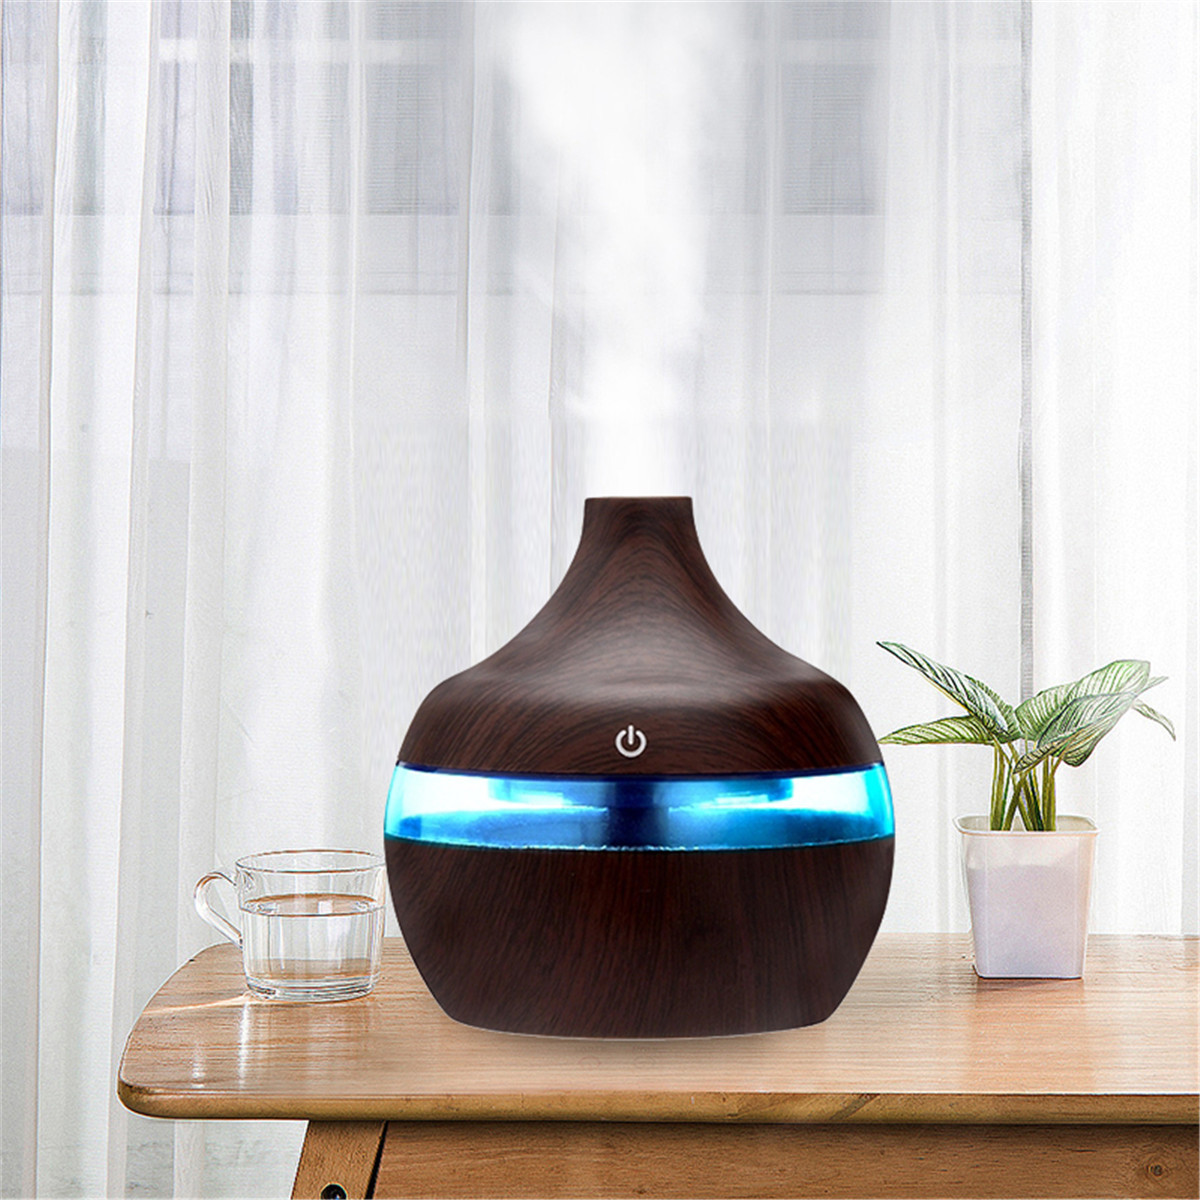 300ml Electric Ultrasonic Air Mist Humidifier Purifier Aroma Diffuser 7 Colors LED USB Charging for Bedroom Home Car Office 10